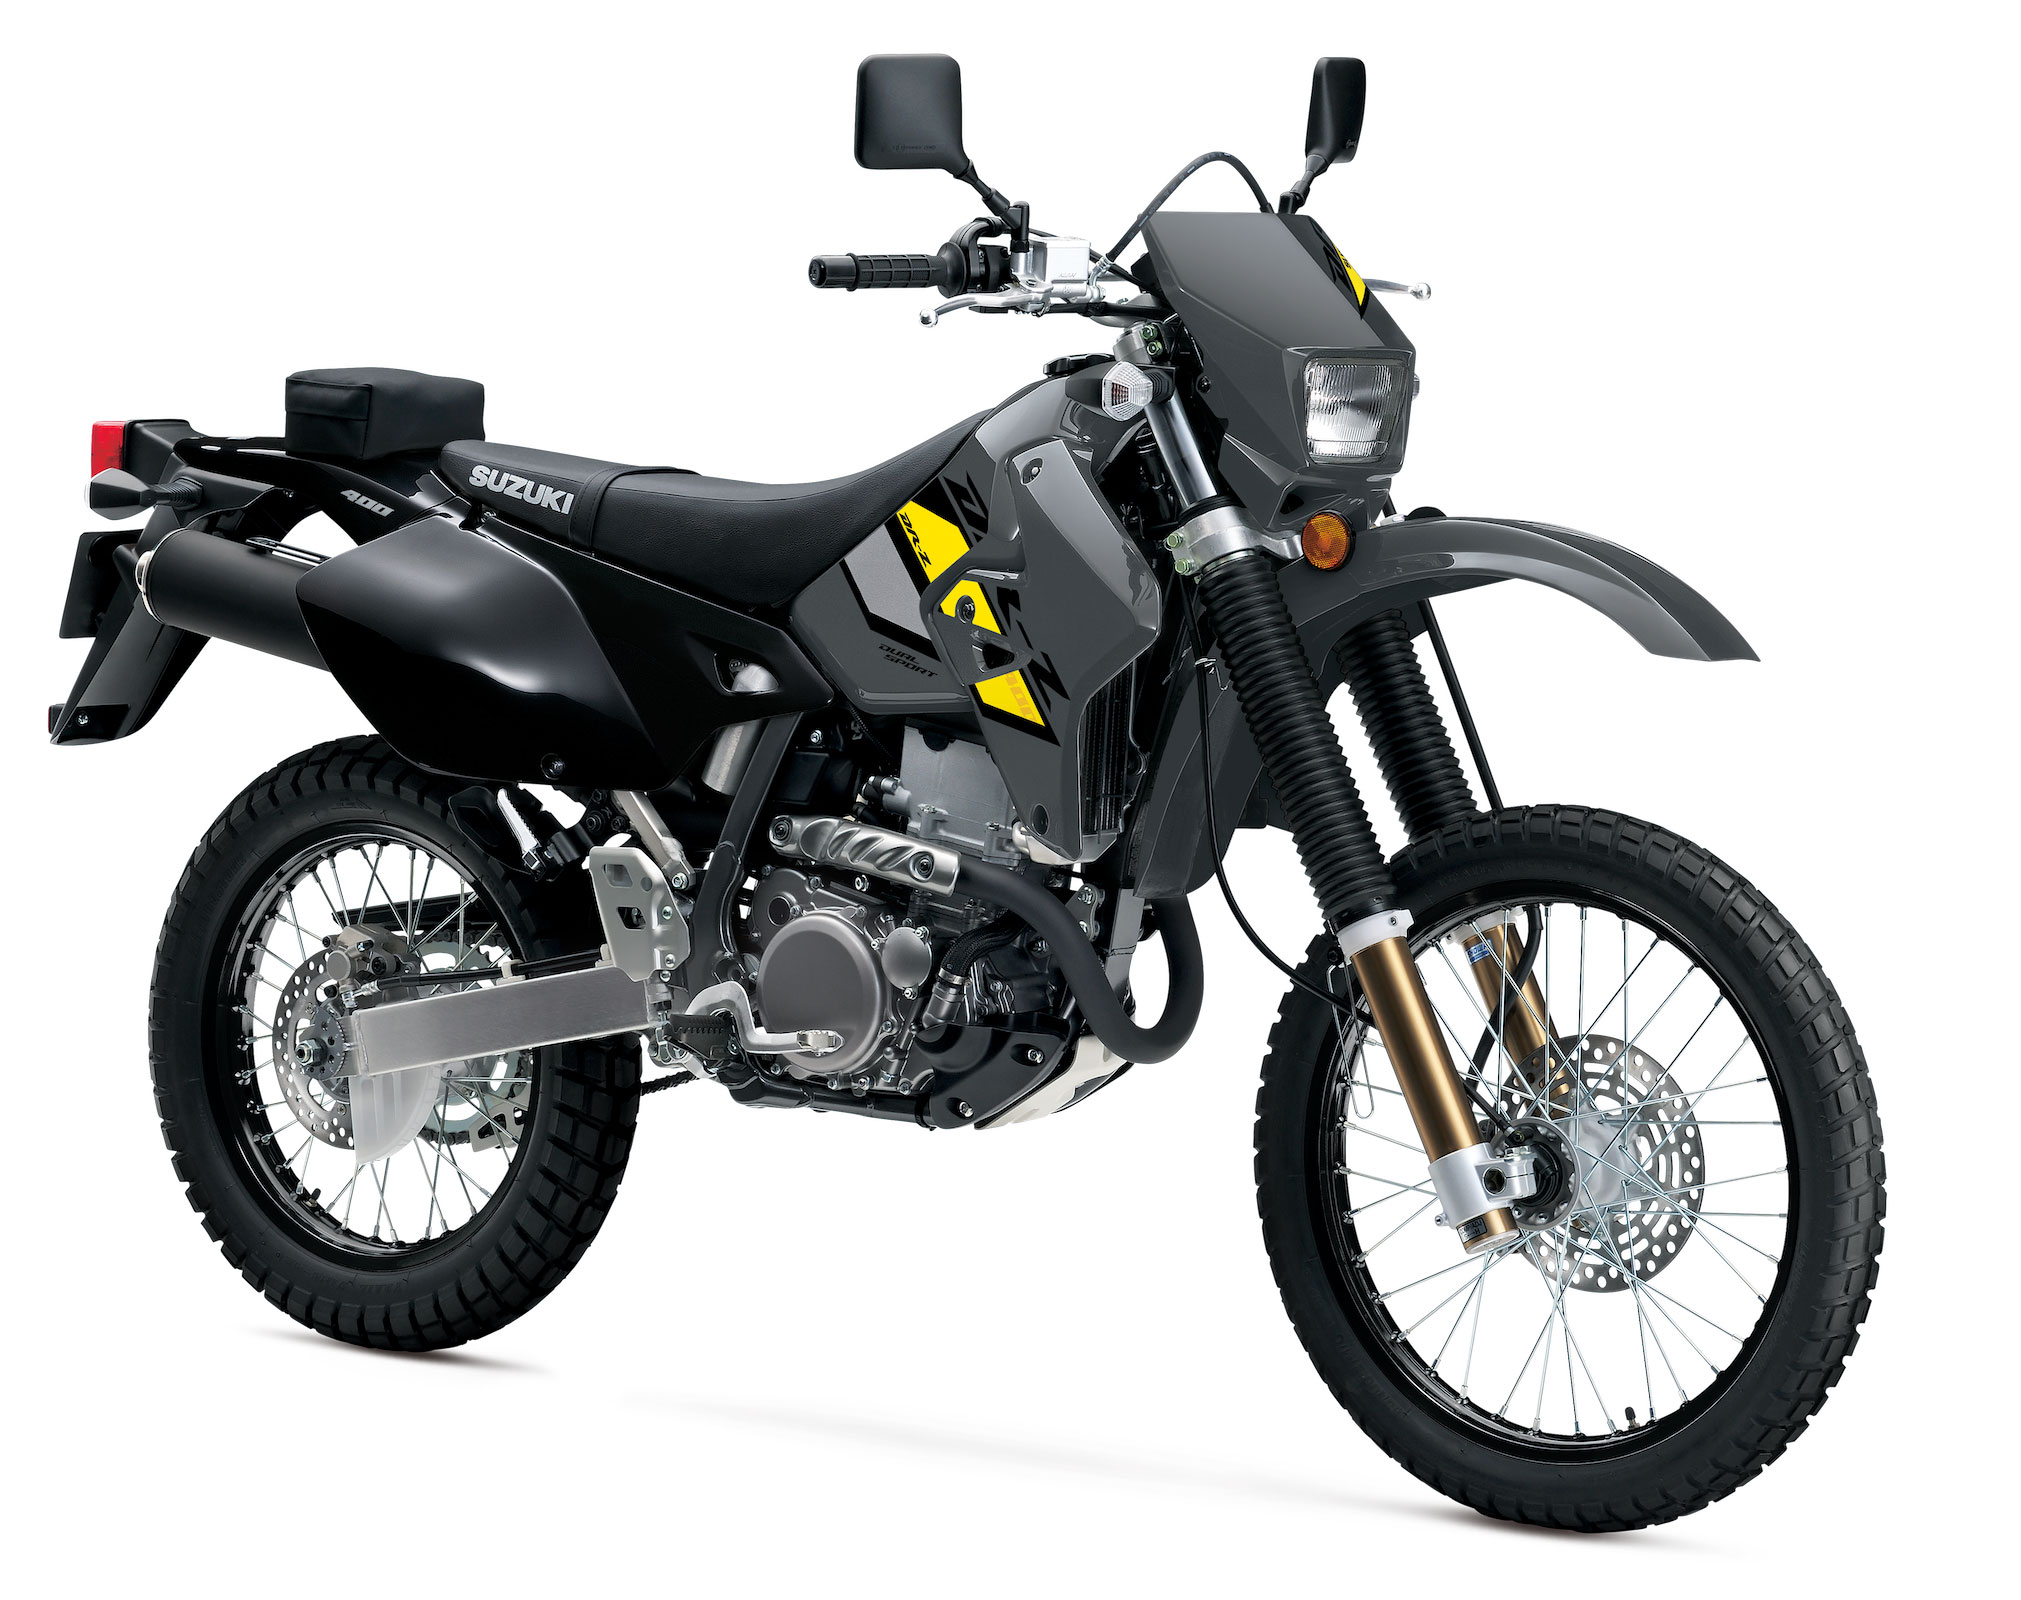 2021 Suzuki DRZ400S Guide • Total Motorcycle